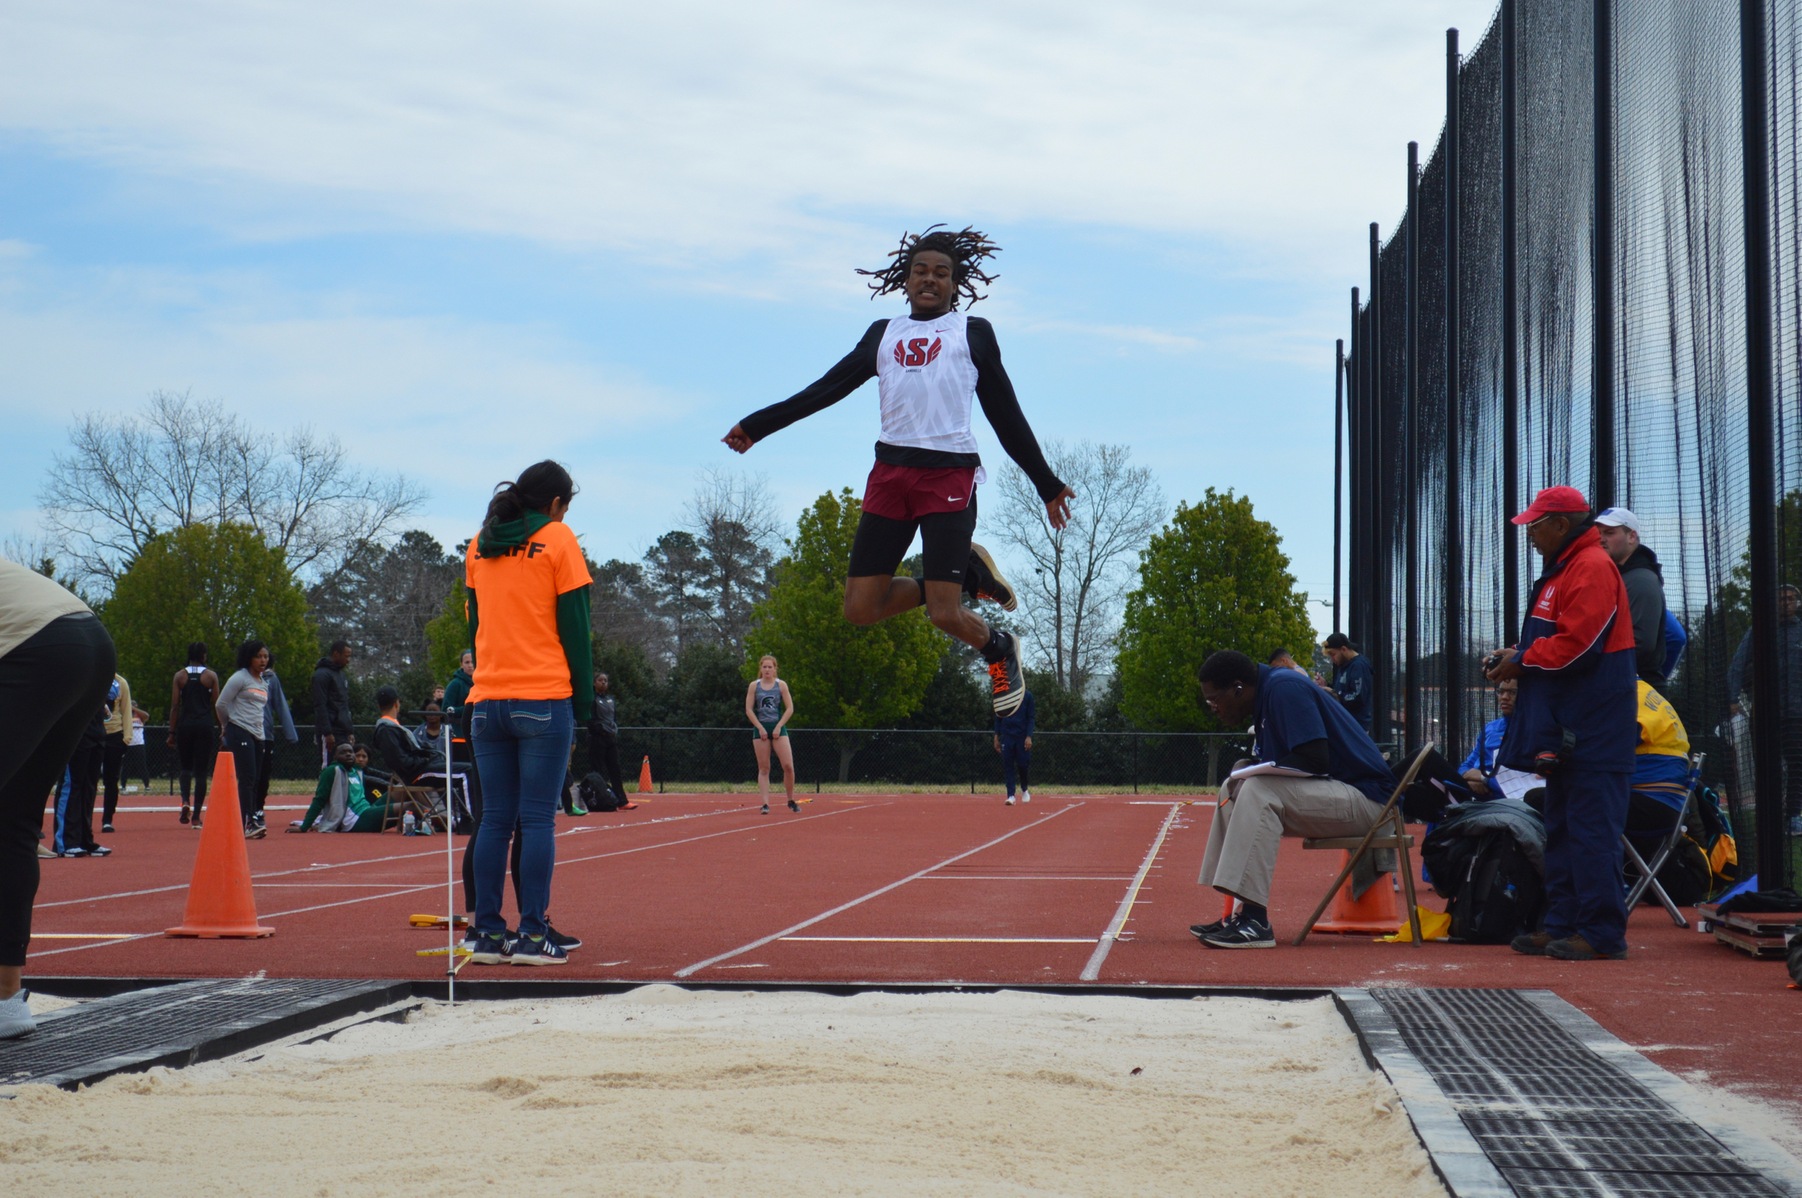 Tyrese Kelly competes in the long jump at Mount Olive on March 24, 2018.